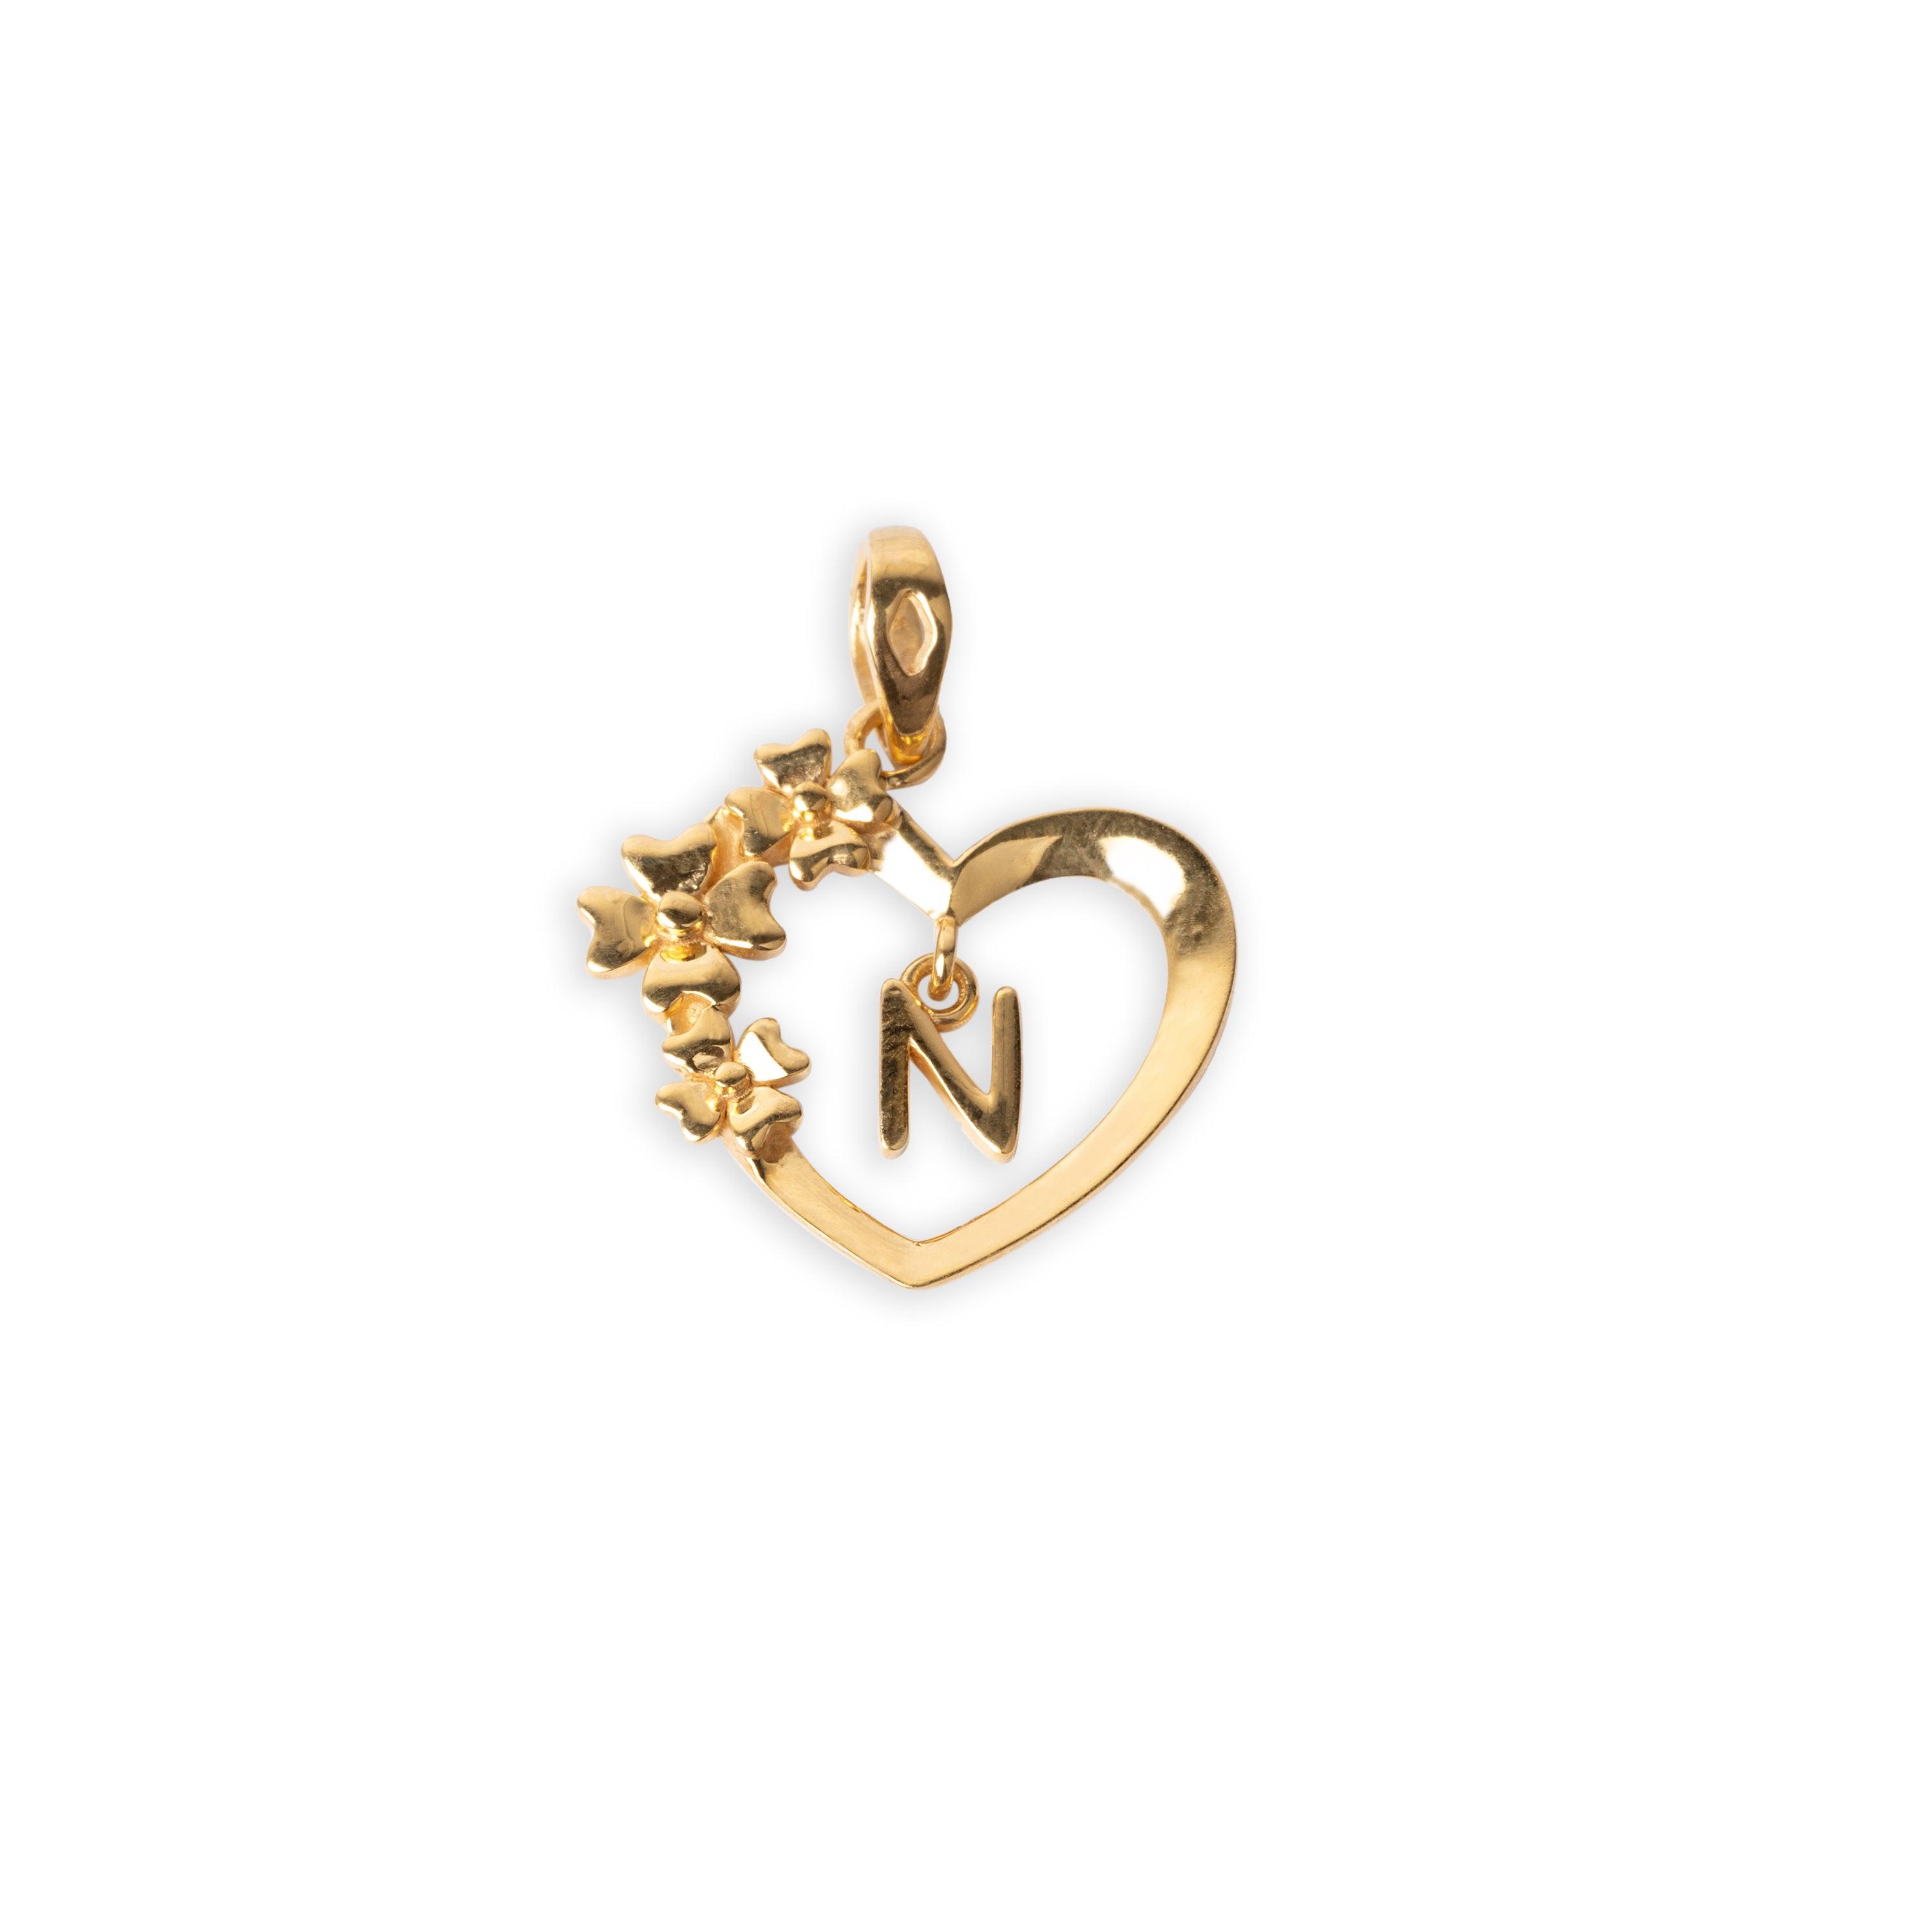 'N' 22ct Gold Heart Shape Initial Pendant with Flower Design P-7035-N - Minar Jewellers